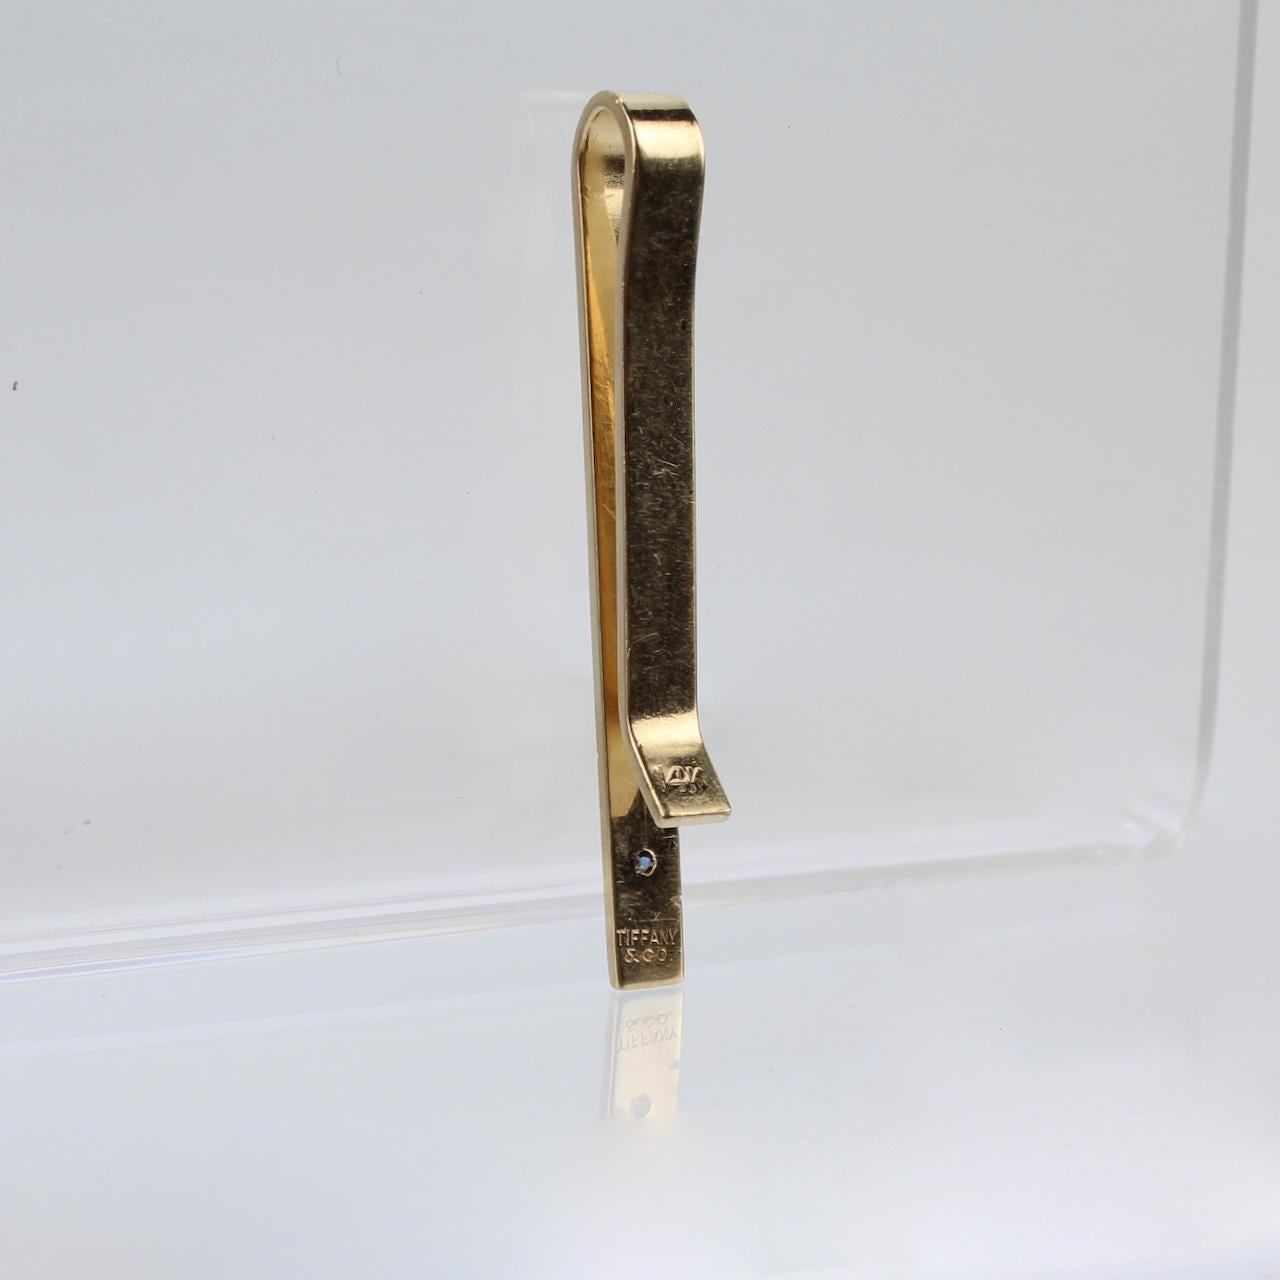 Tiffany & Co. 14 Karat Gold and Sapphire Modern Tie Clip or Tie Bar 2